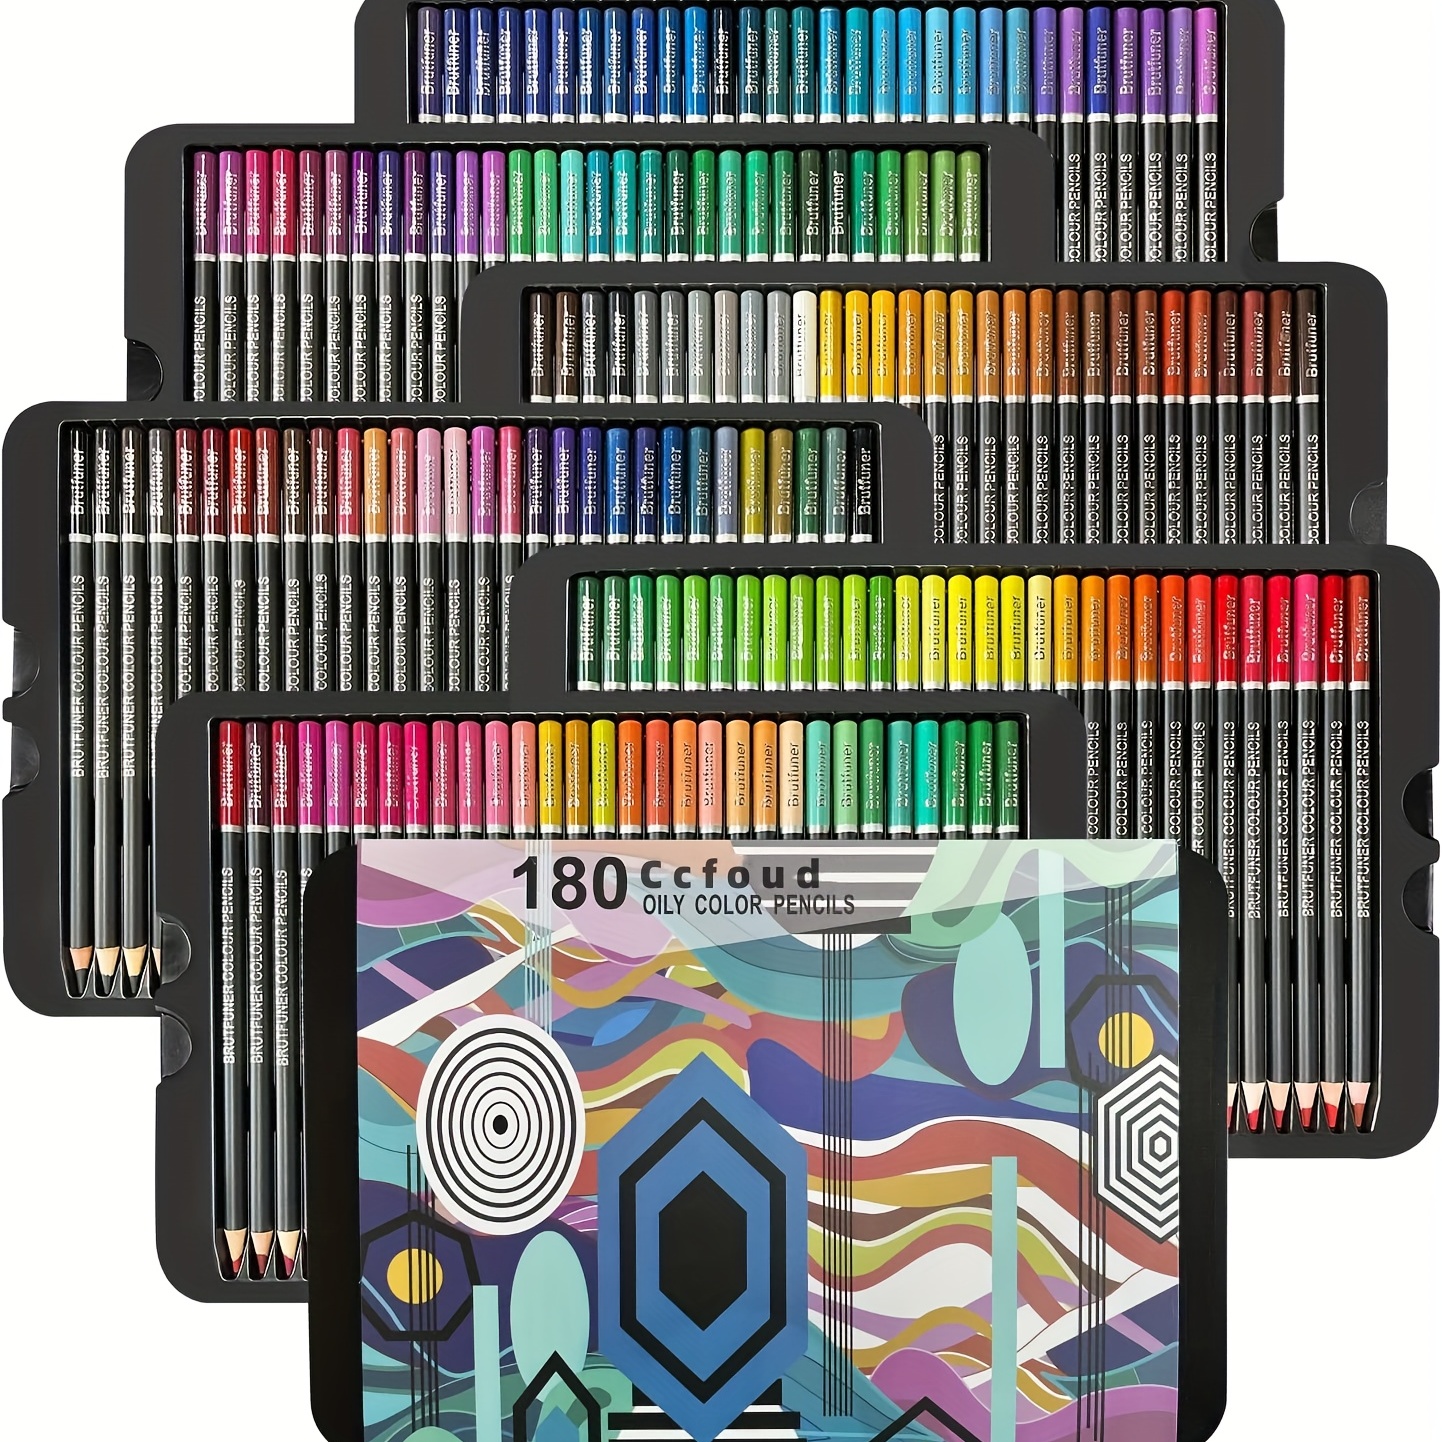  180 Professional Colored Pencils, Artist Pencils Set for  Coloring Books, Premium Artist Soft Core with Vibrant Colors for Sketching  Shading Blending Coloring, Gift Box for Beginners Adults Artists : Arts